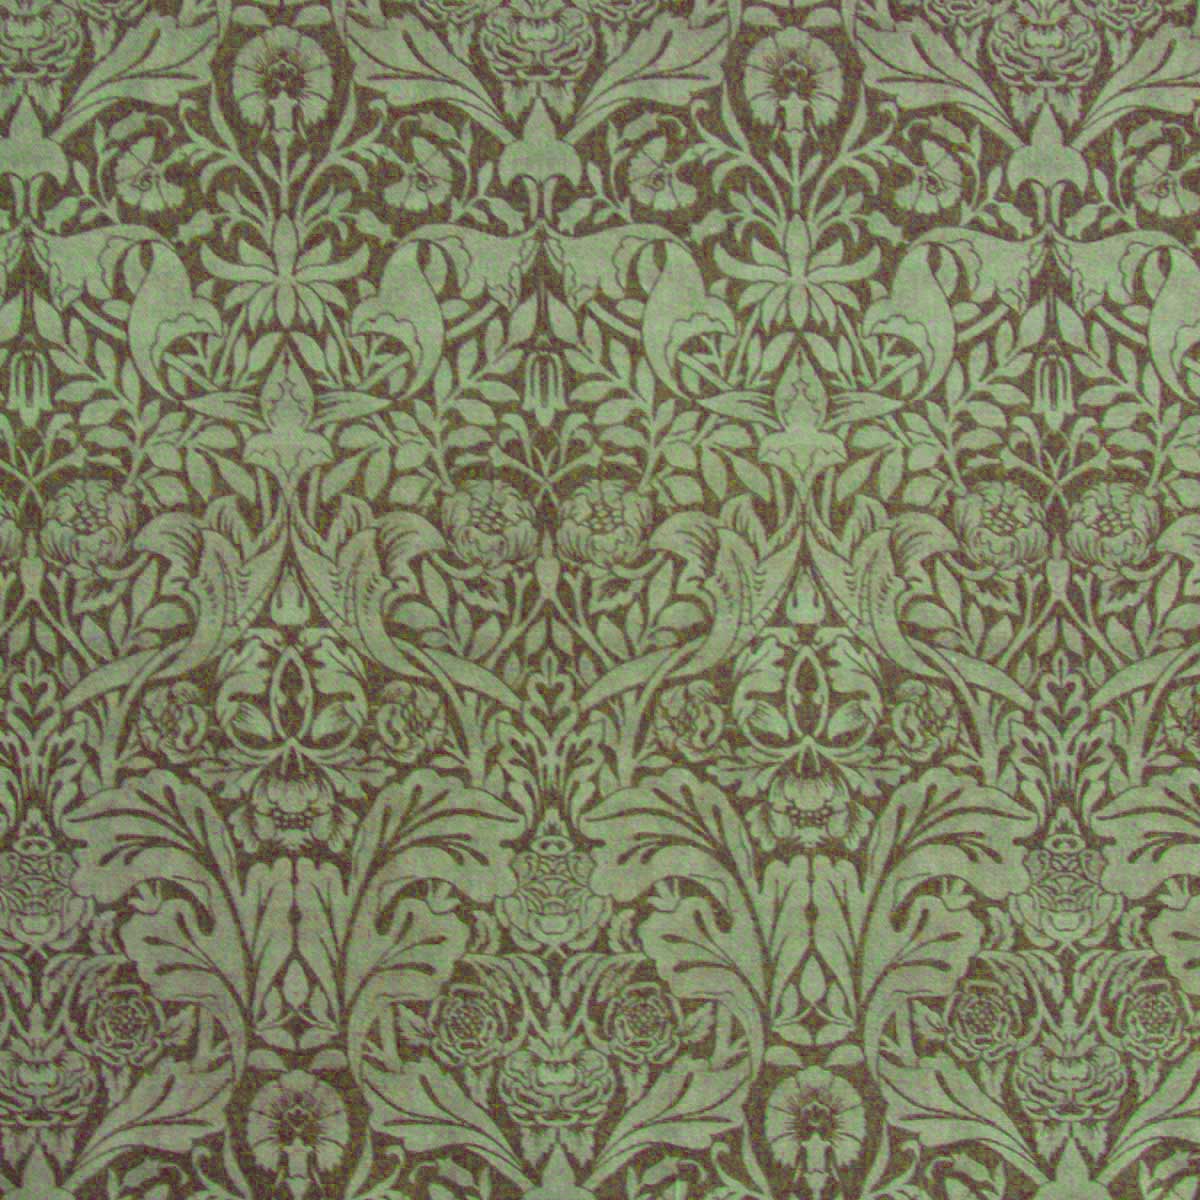 Patterned Curtain and Upholstery Fabric | William Morris Designs Saint  James Damask Green Velvet from Loome Fabrics